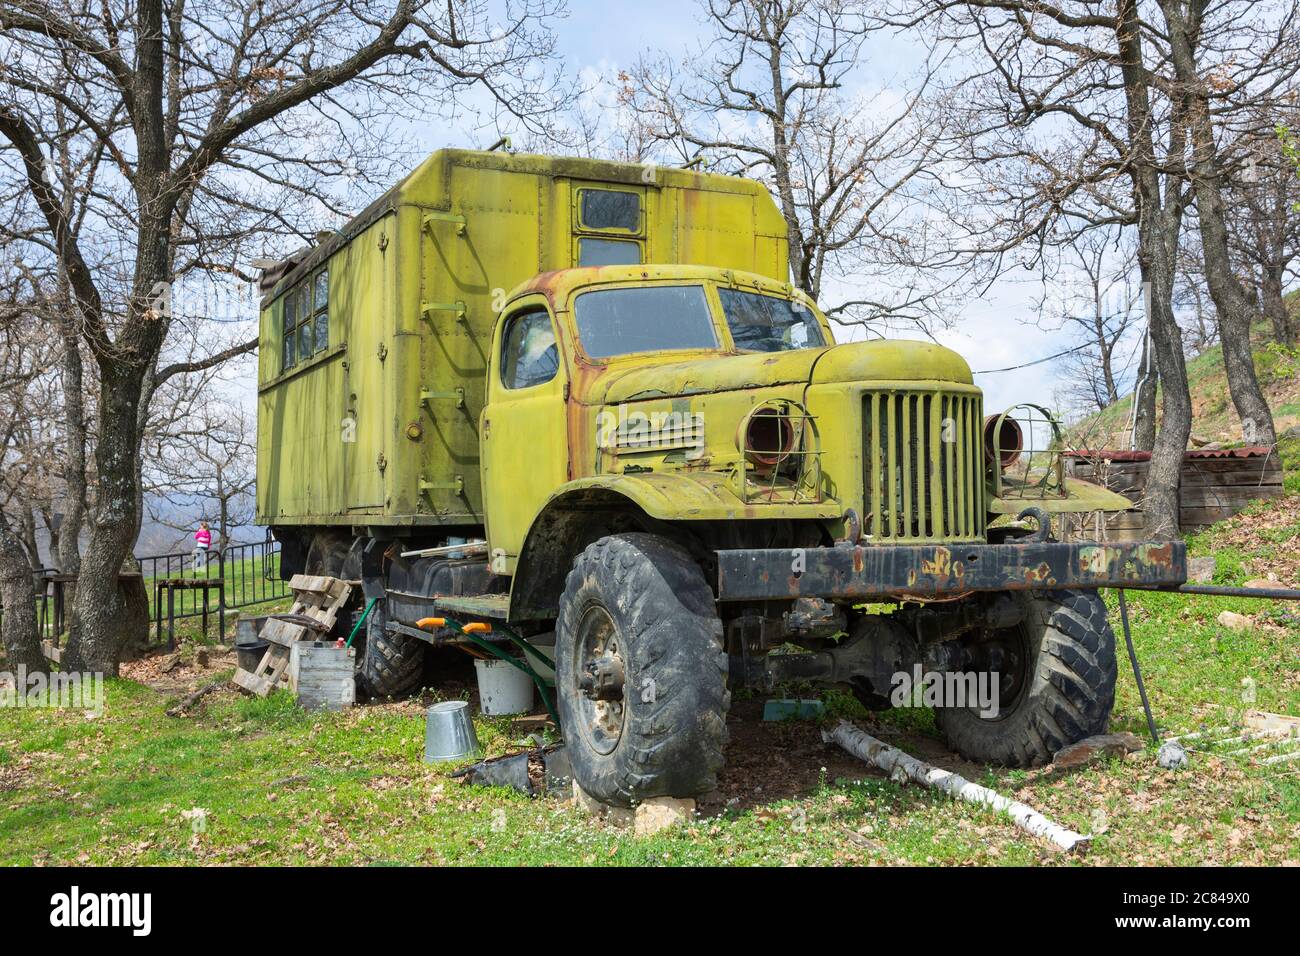 Old russian military truck Zil abandoned in nature. Retro vehicle. Stock Photo